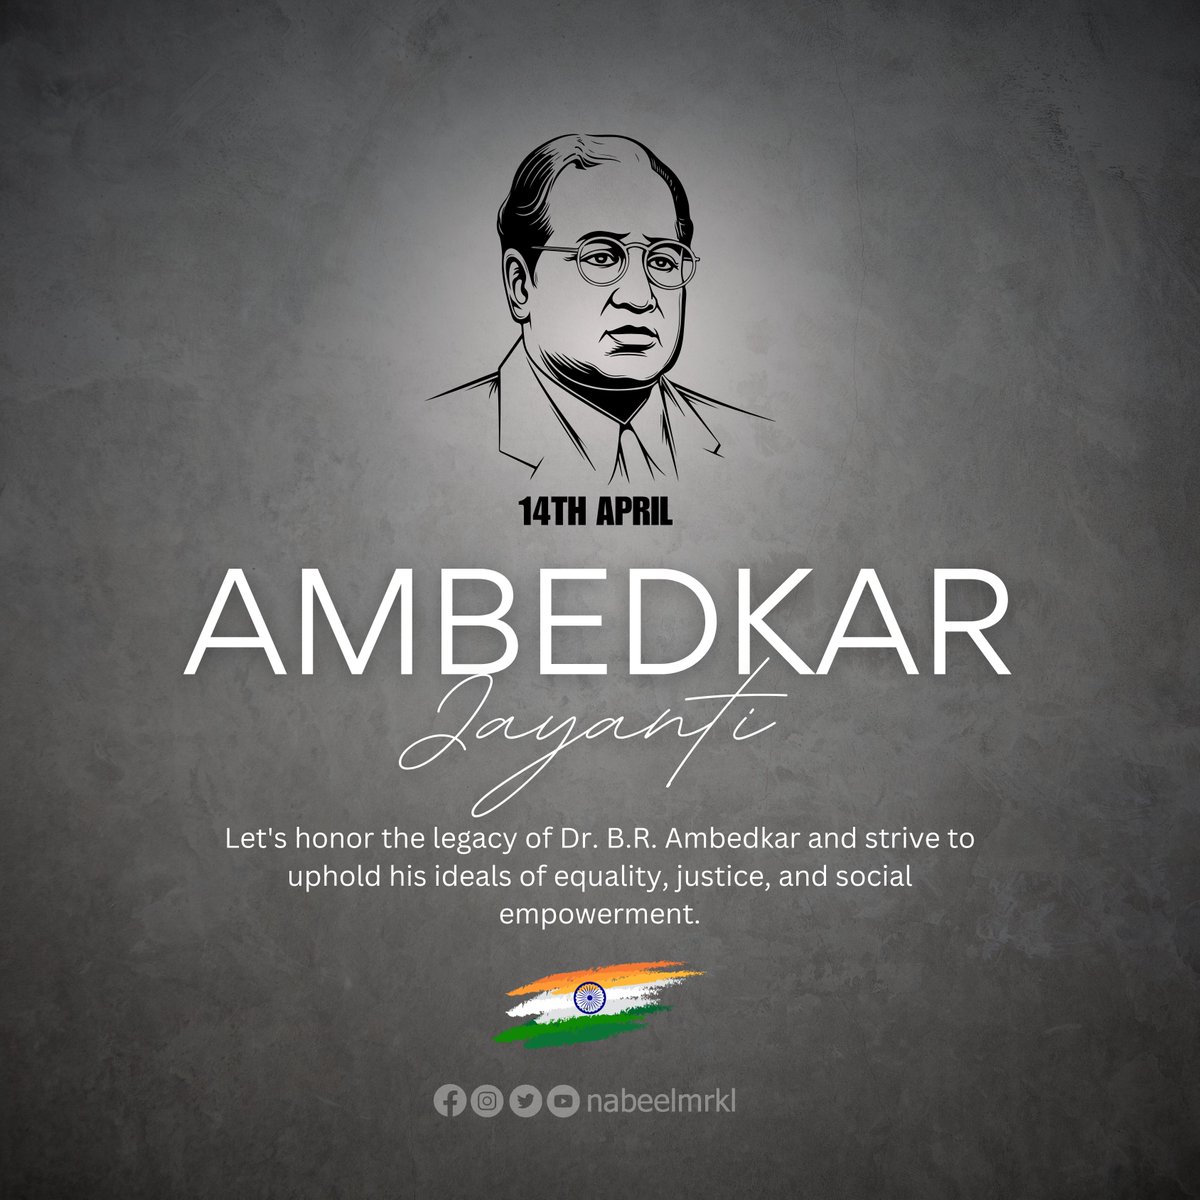 Let's honor the legacy of Dr. B.R. Ambedkar and strive to uphold his ideals of equality, justice, and social empowerment.

#April14 #AmbedkarJayanti